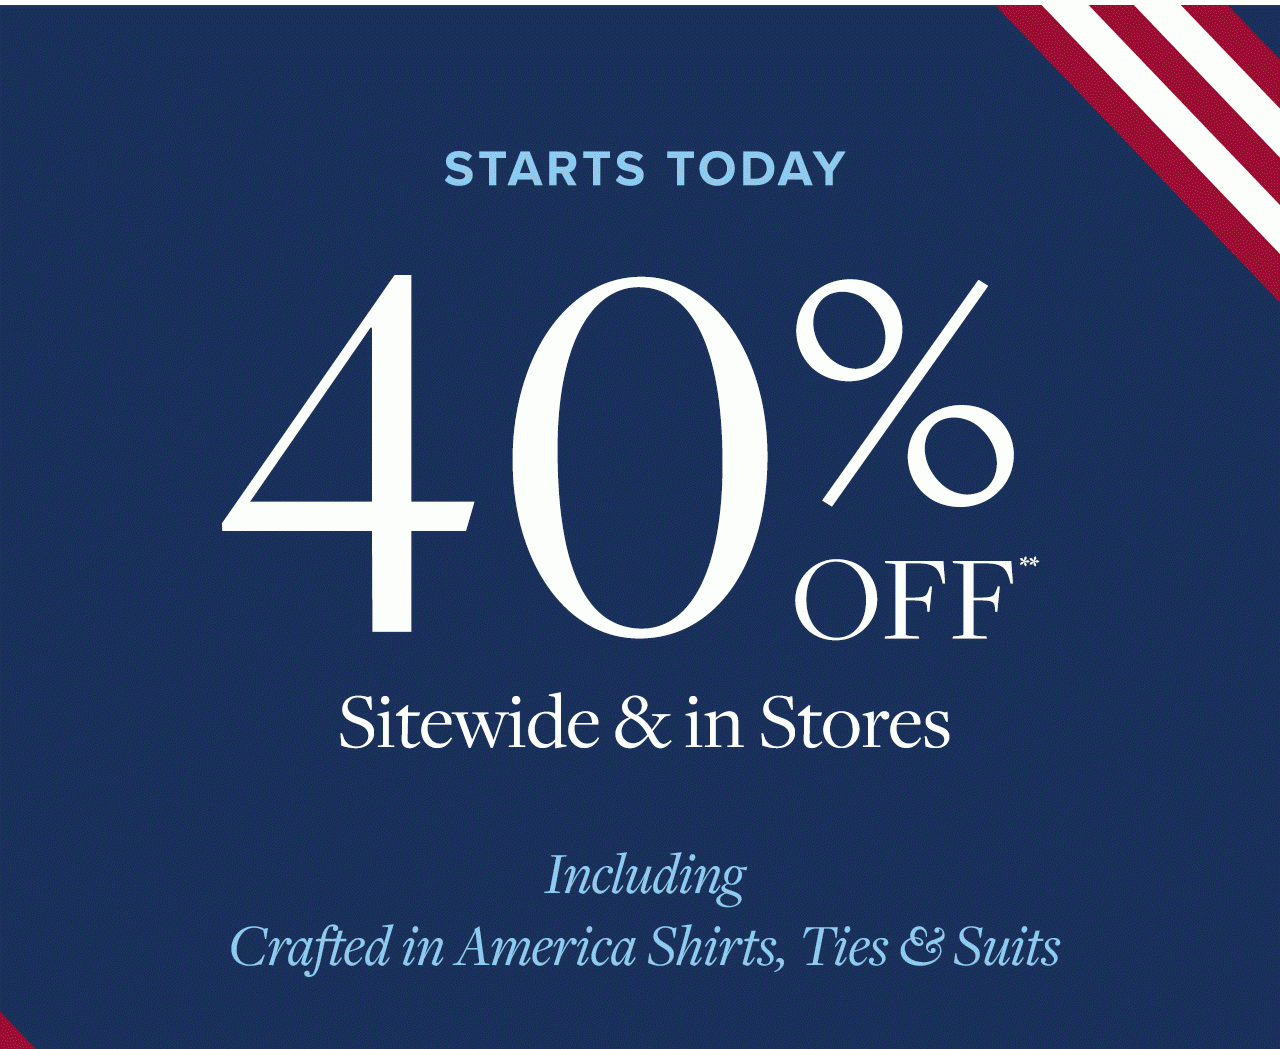 Starts Today 40% Off Sitewide and in Stores Including Crafted in America Shirts, Ties and Suits